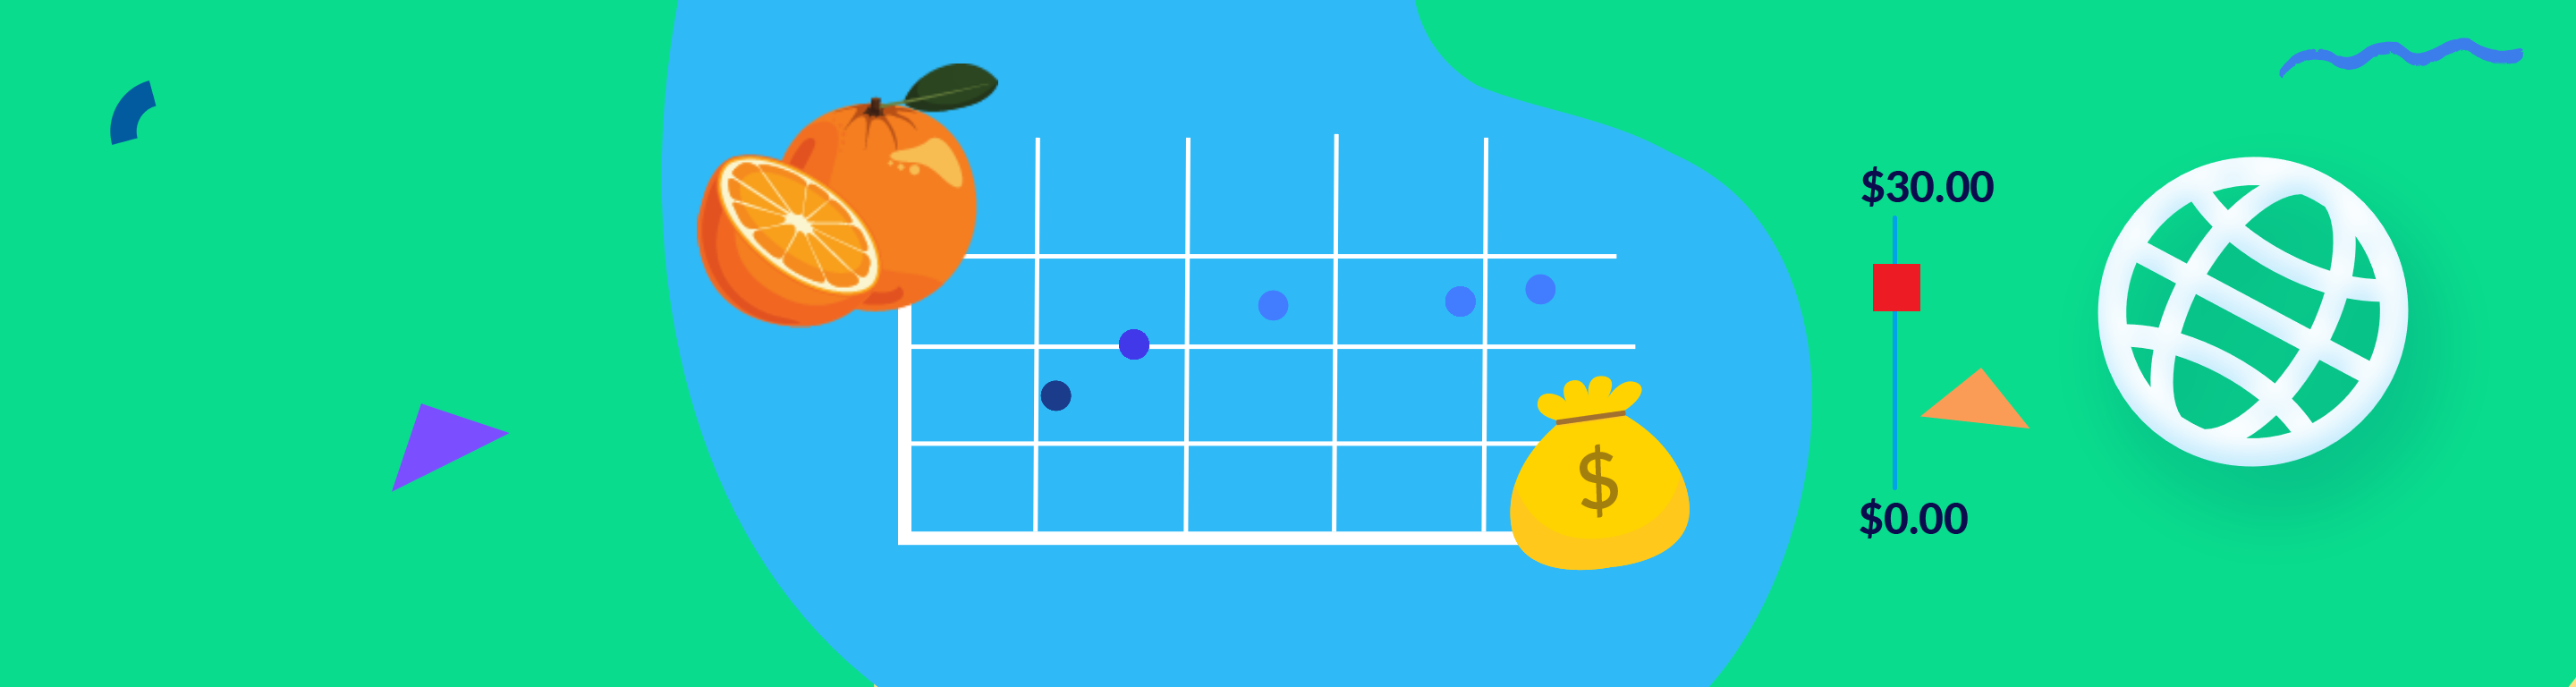 Dotted graph increasing towards a price cap, an orange on the left of the graph, a money bag on the right of the graph, and the Online Assignment globe on the far right